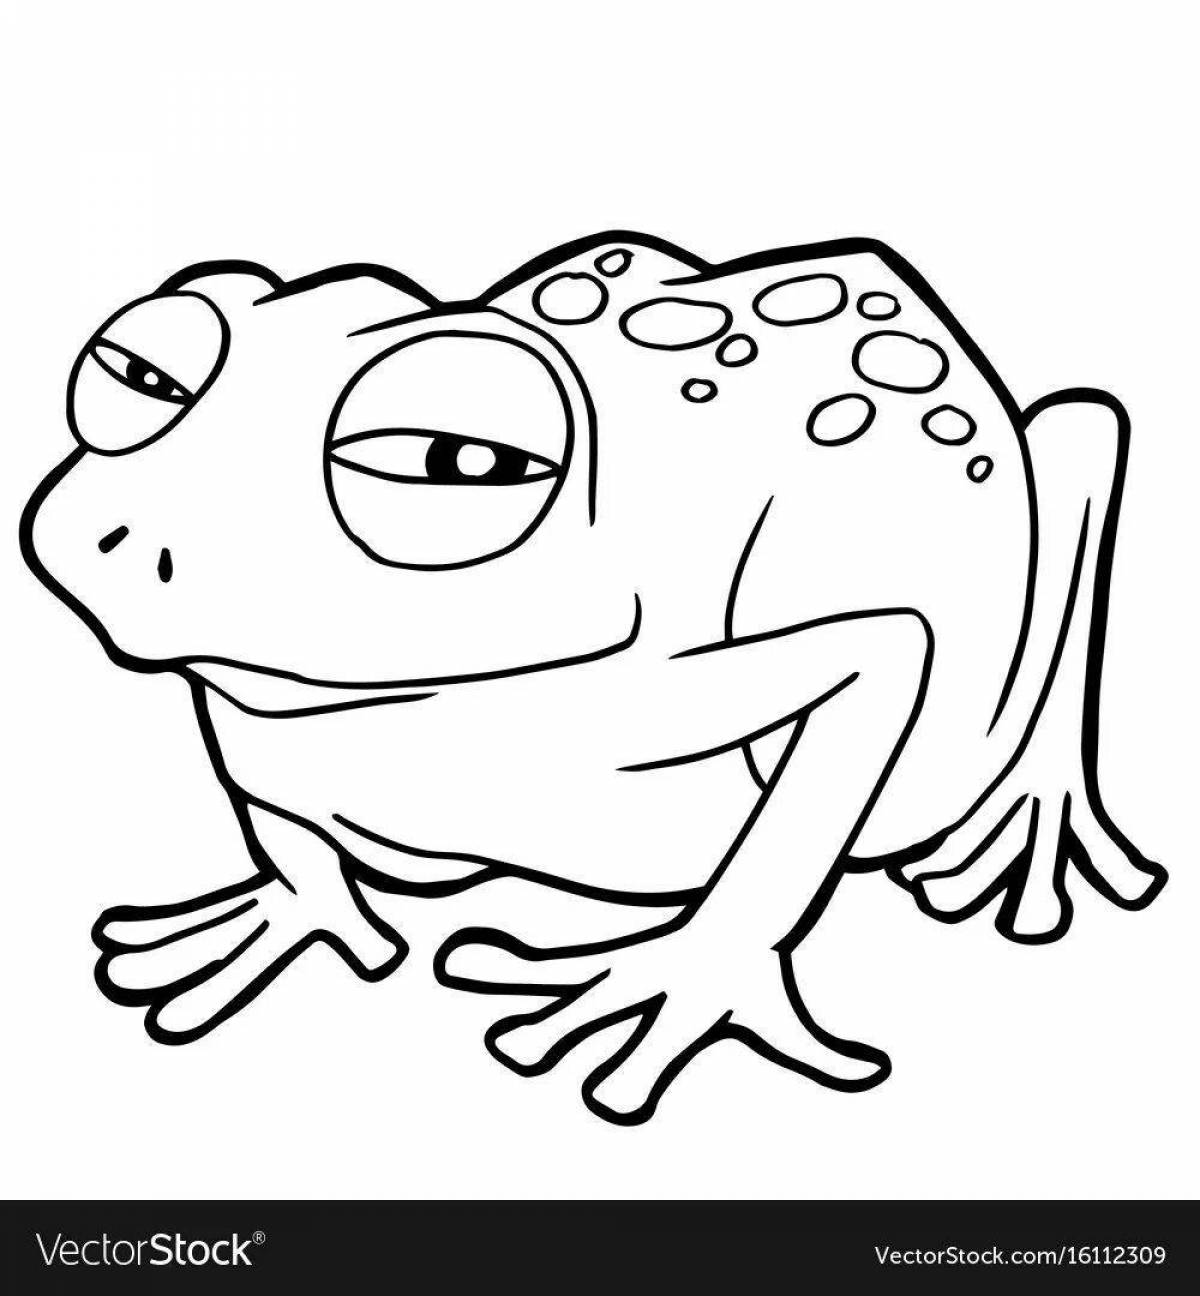 Fun coloring of a cute frog with a fungus on its head